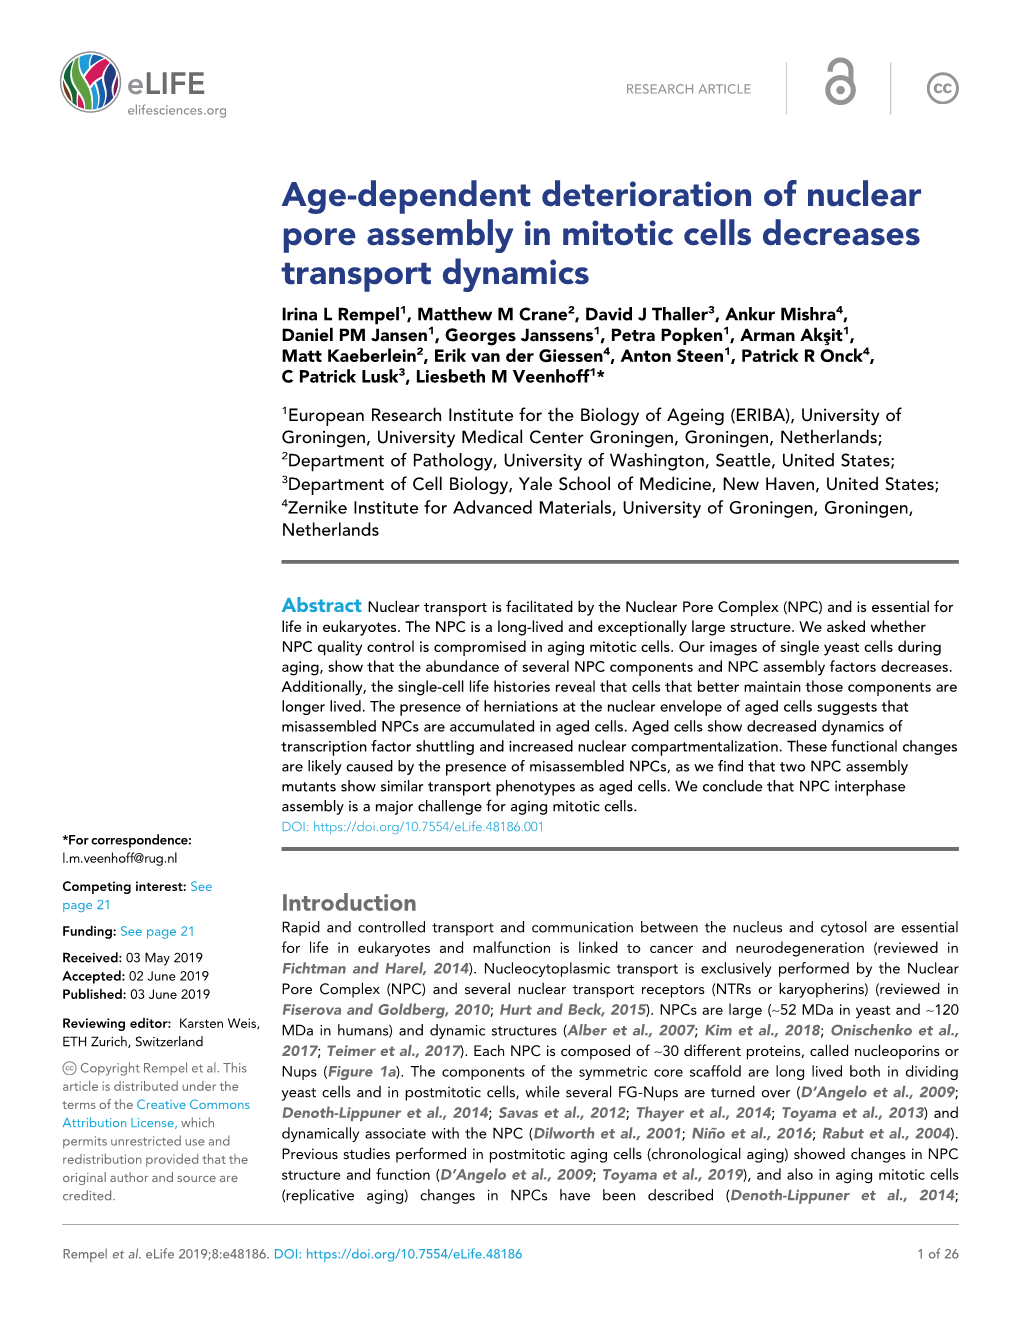 Age-Dependent Deterioration of Nuclear Pore Assembly in Mitotic